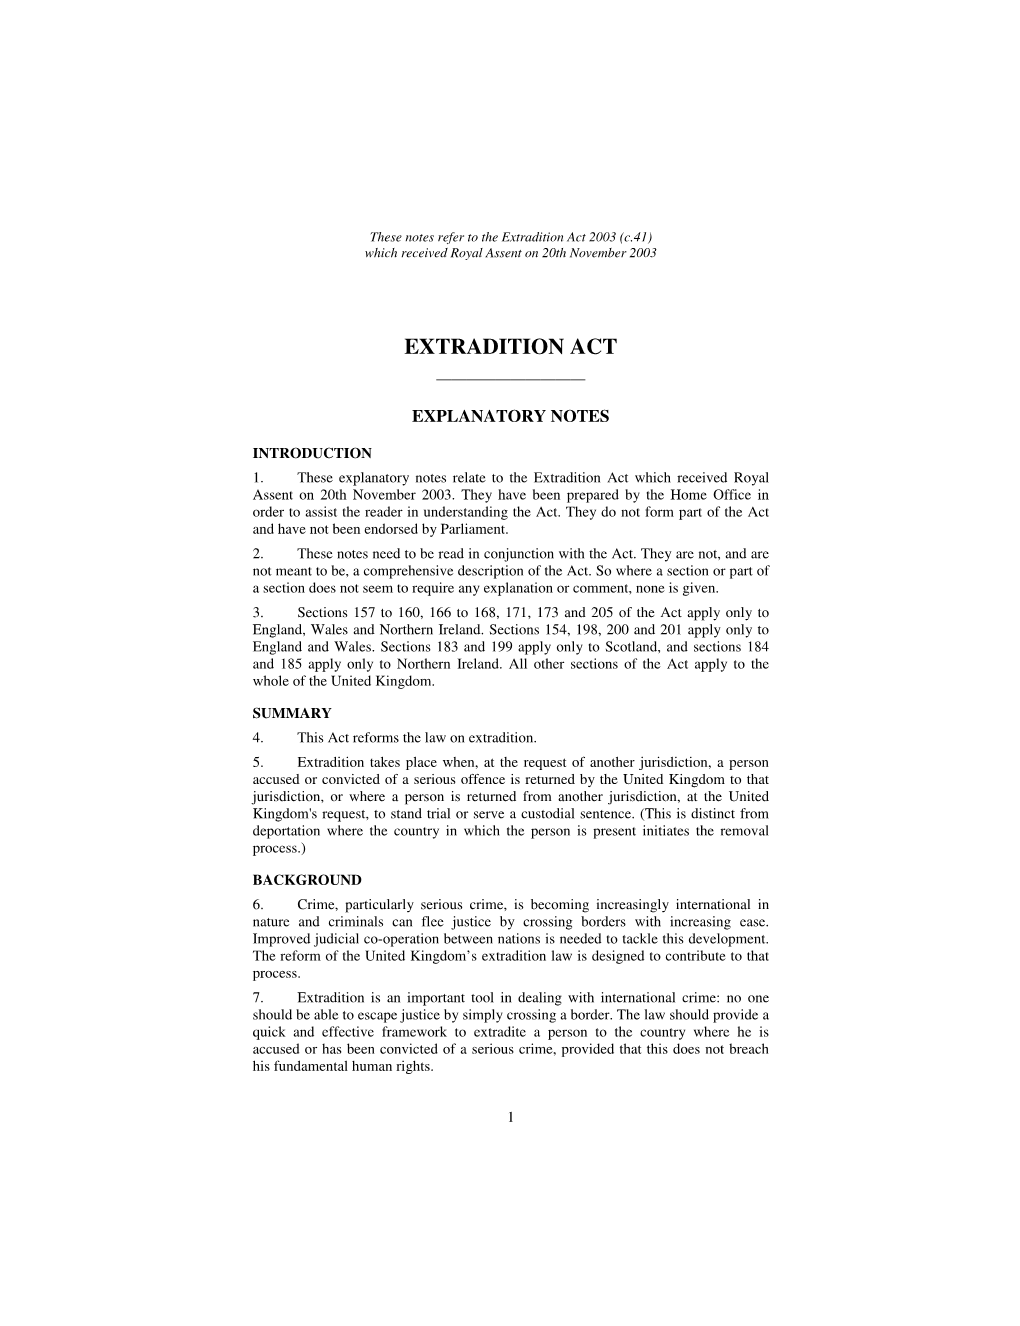 Extradition Act 2003 (C.41) Which Received Royal Assent on 20Th November 2003